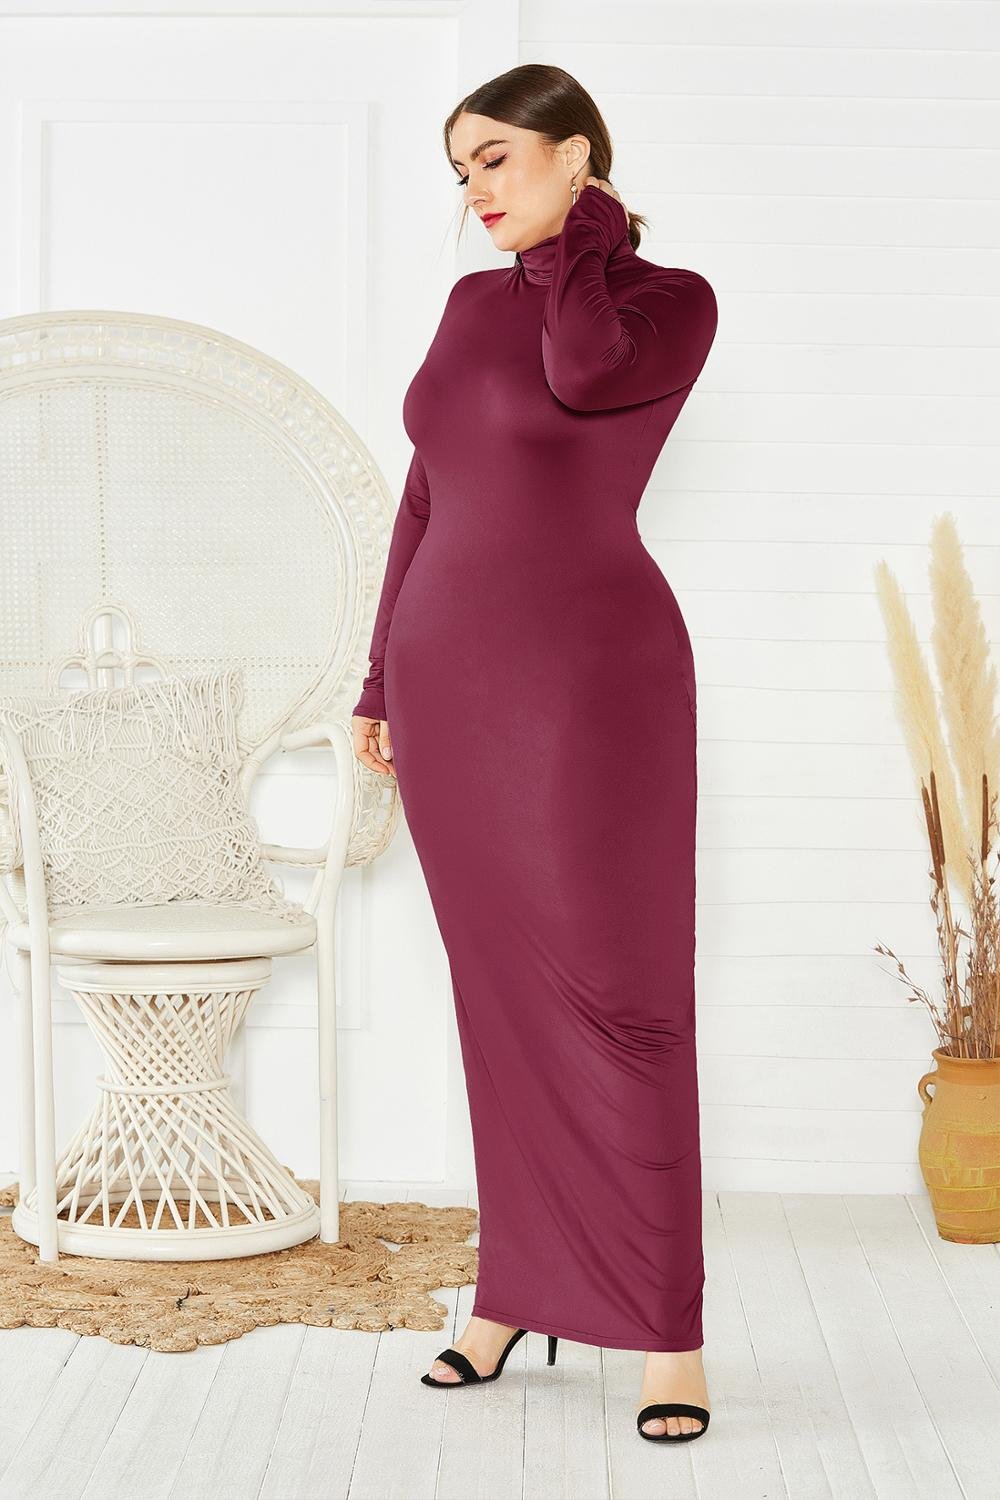 Spring Autumn Women Solid Casual Slim Bodycon Package Hip Maxi Dress Long Sleeve Turtleneck Stretchy Long Dresses Plus Size Robe